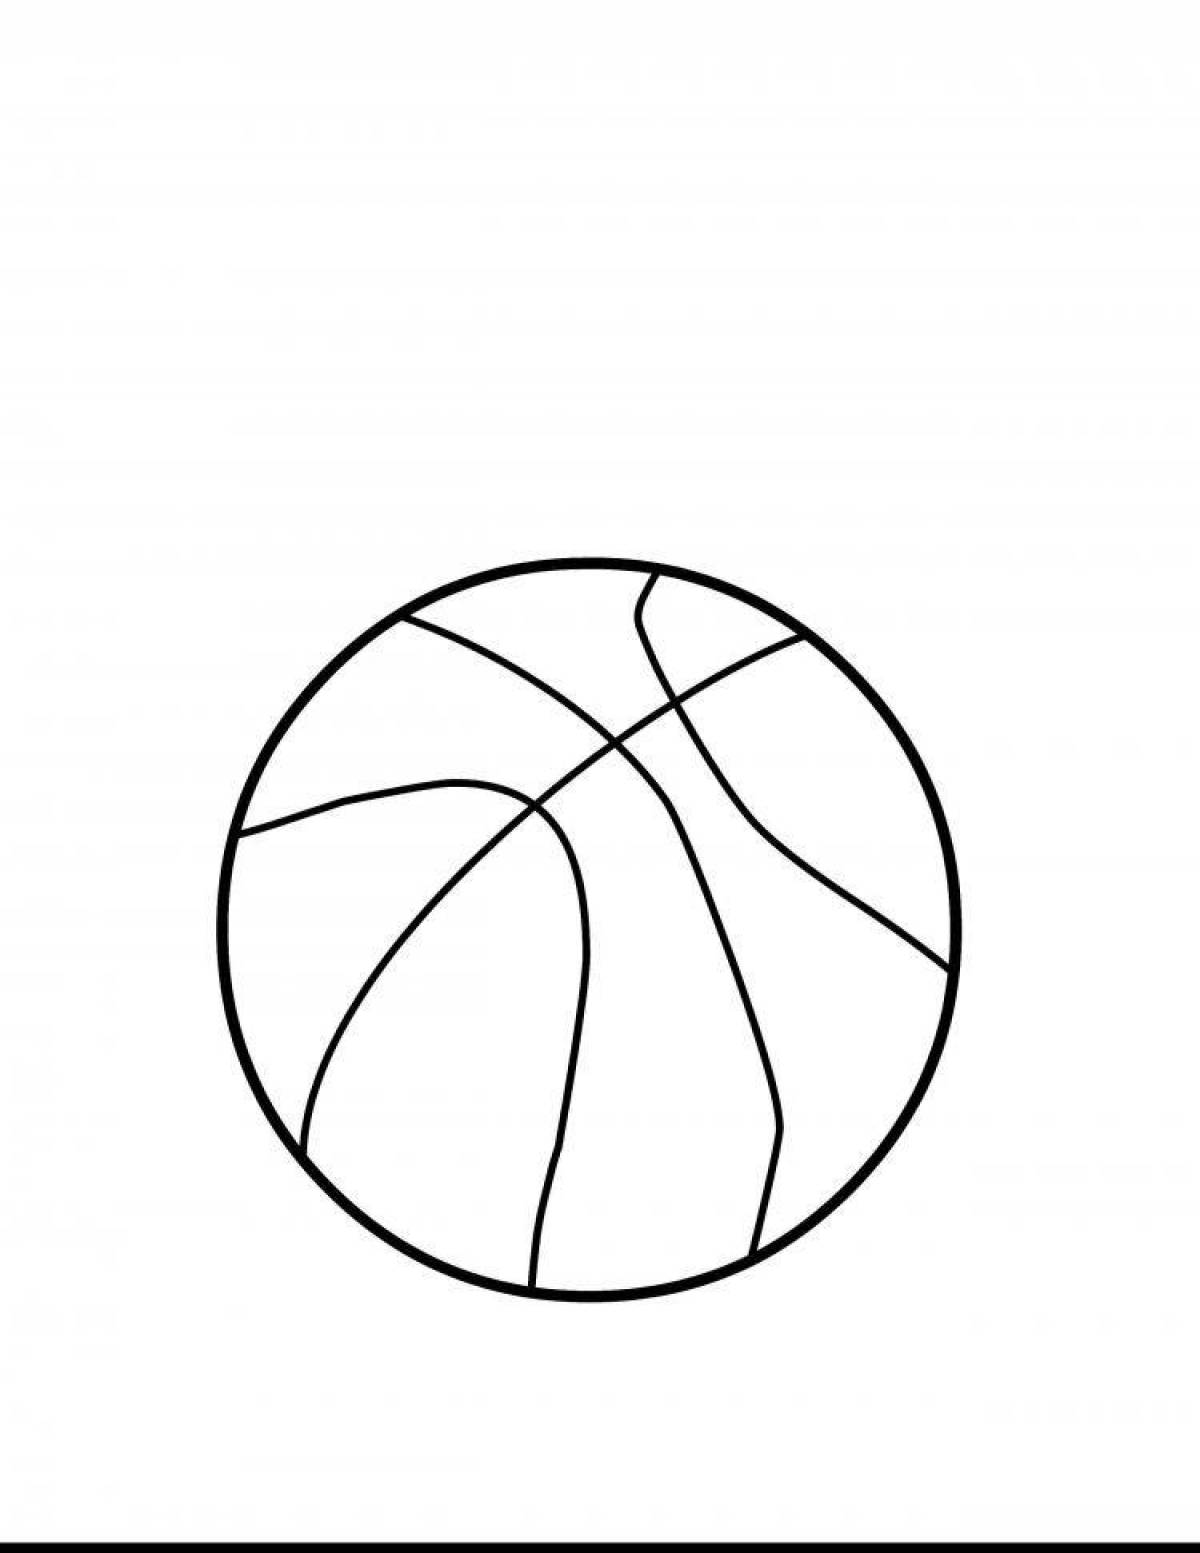 Great basketball coloring page